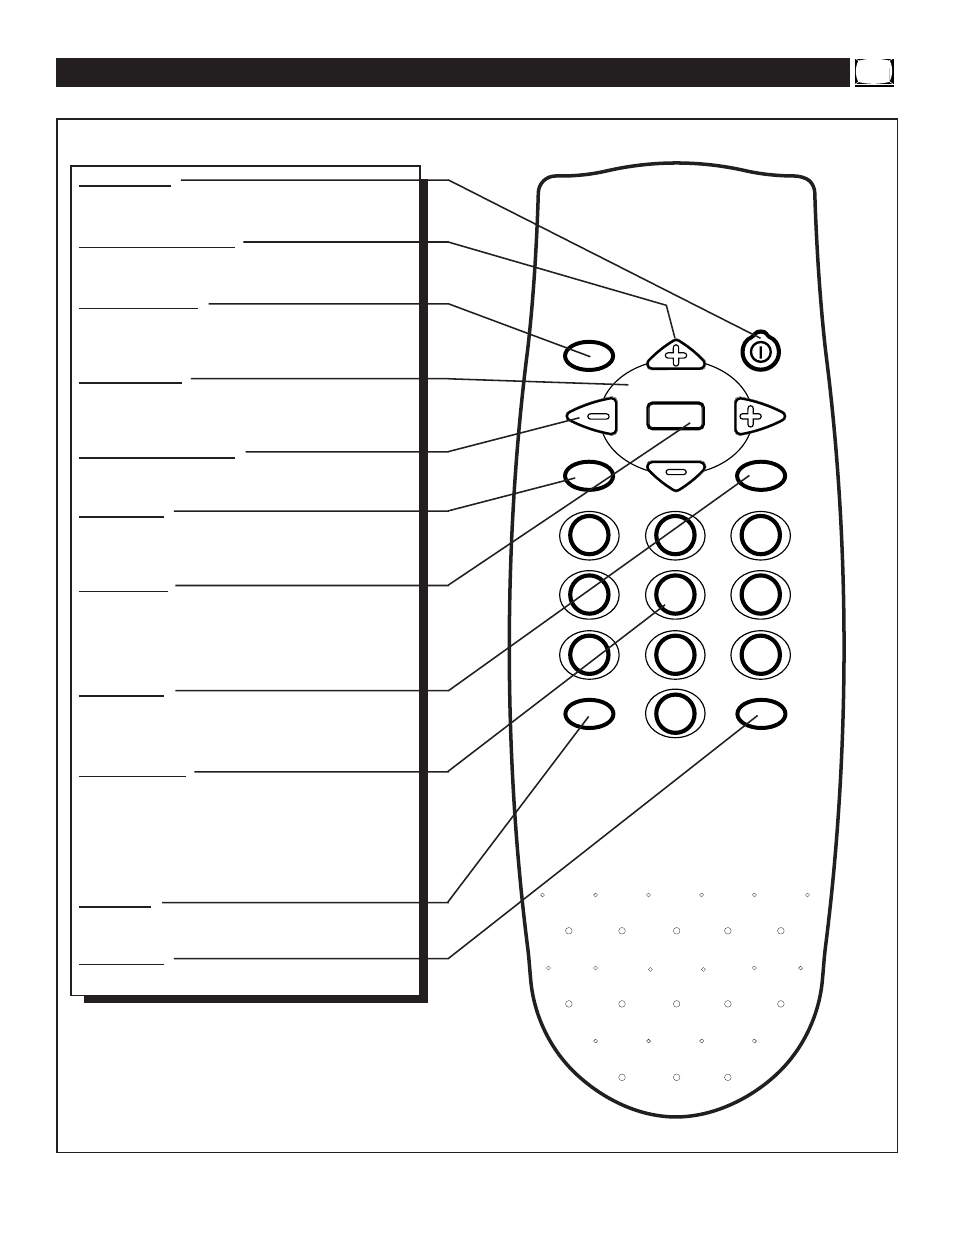 Tv r | Philips TR2503C1 User Manual | Page 9 / 32